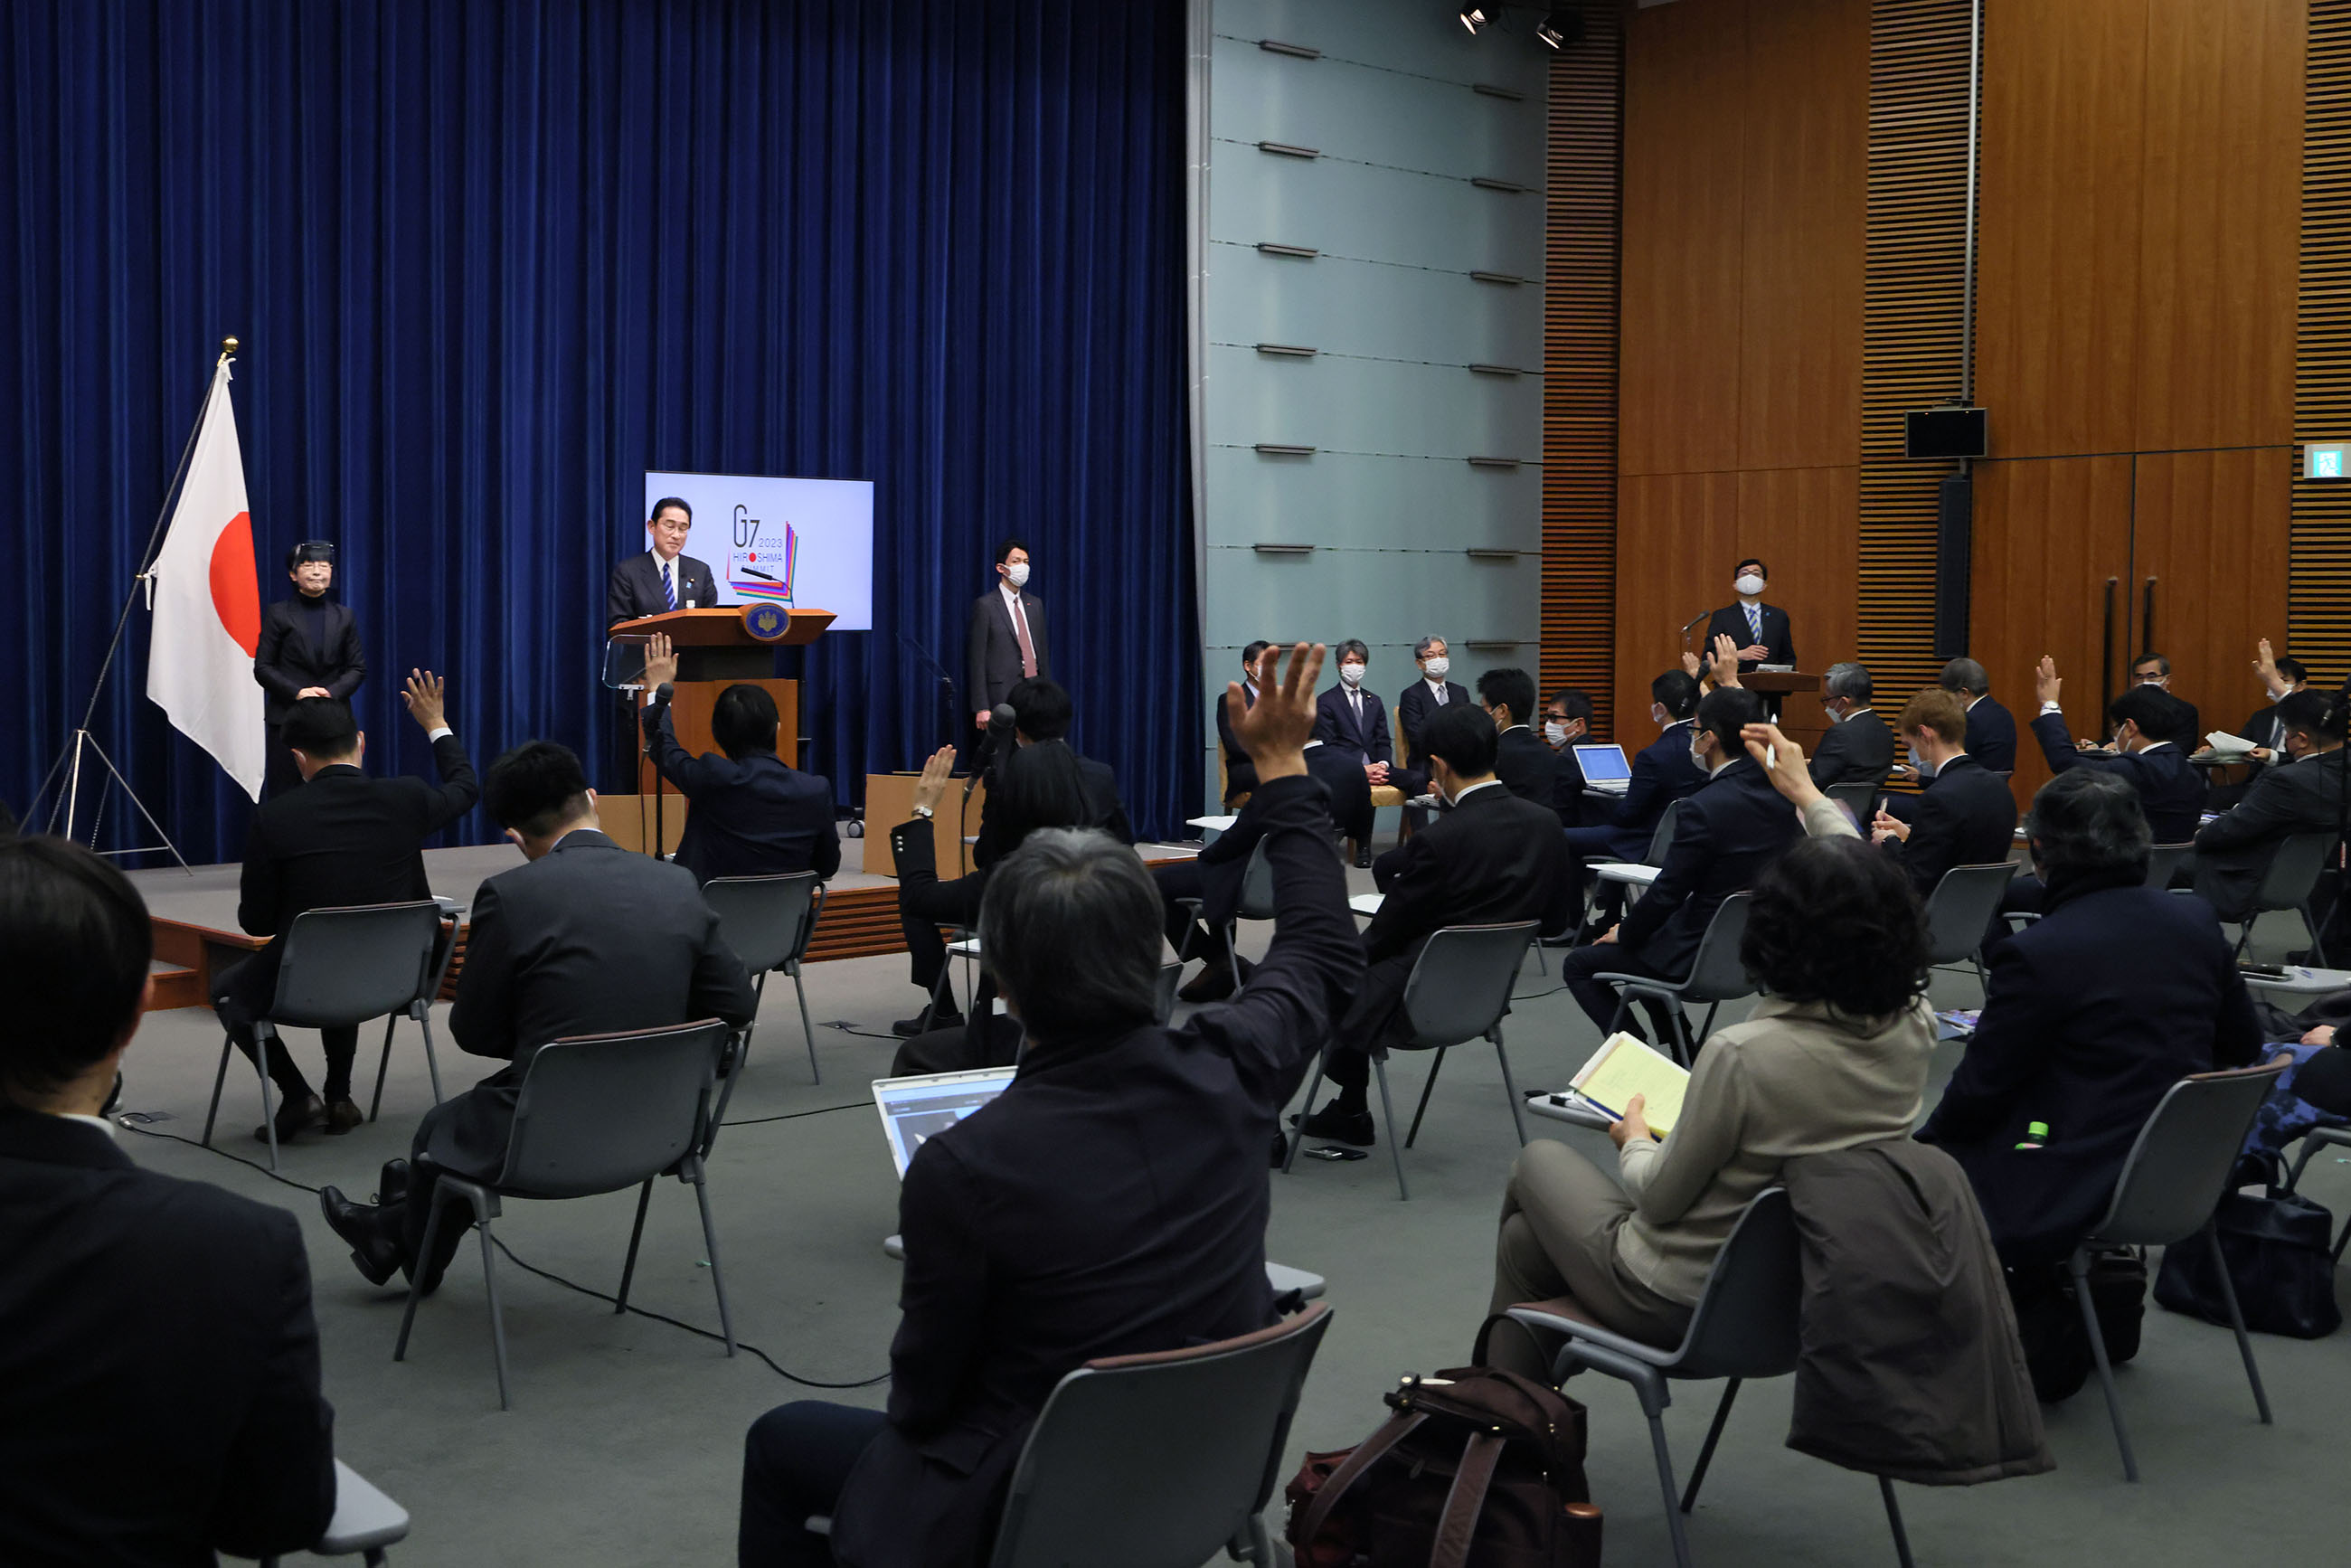 Prime Minister Kishida answering questions from the journalists (1)